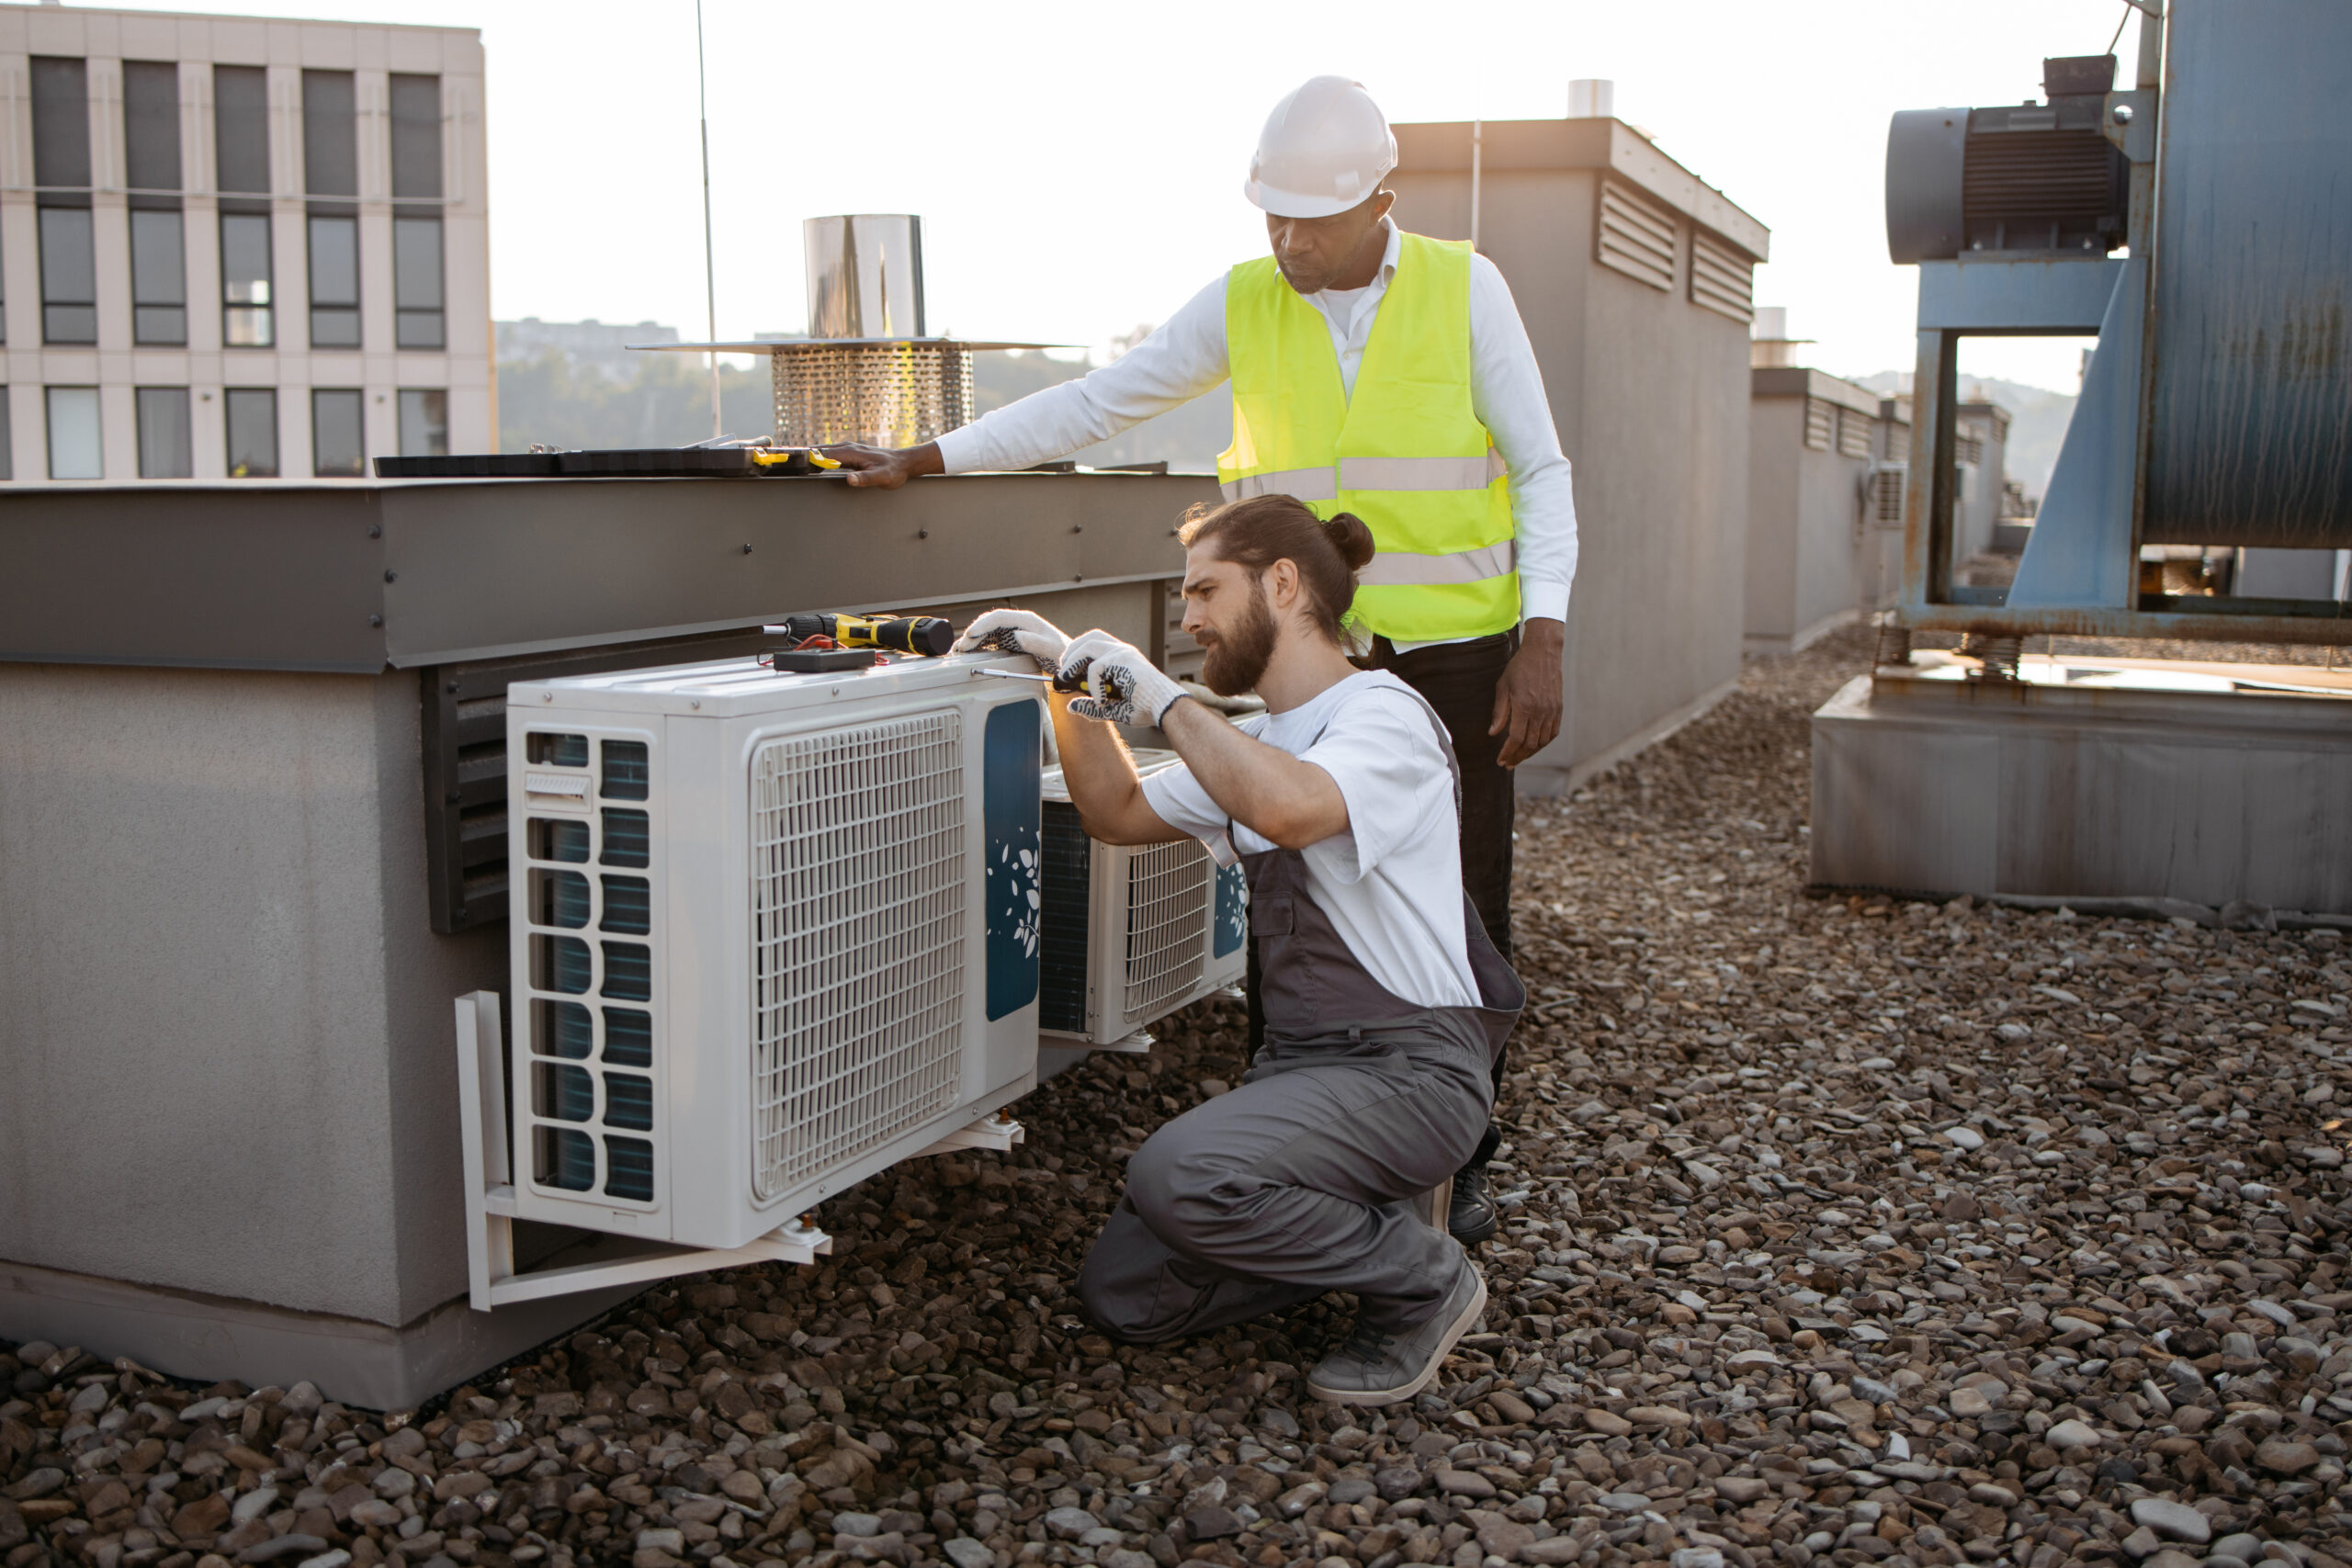 Diverse plant workers repairing air conditioner on rooftop